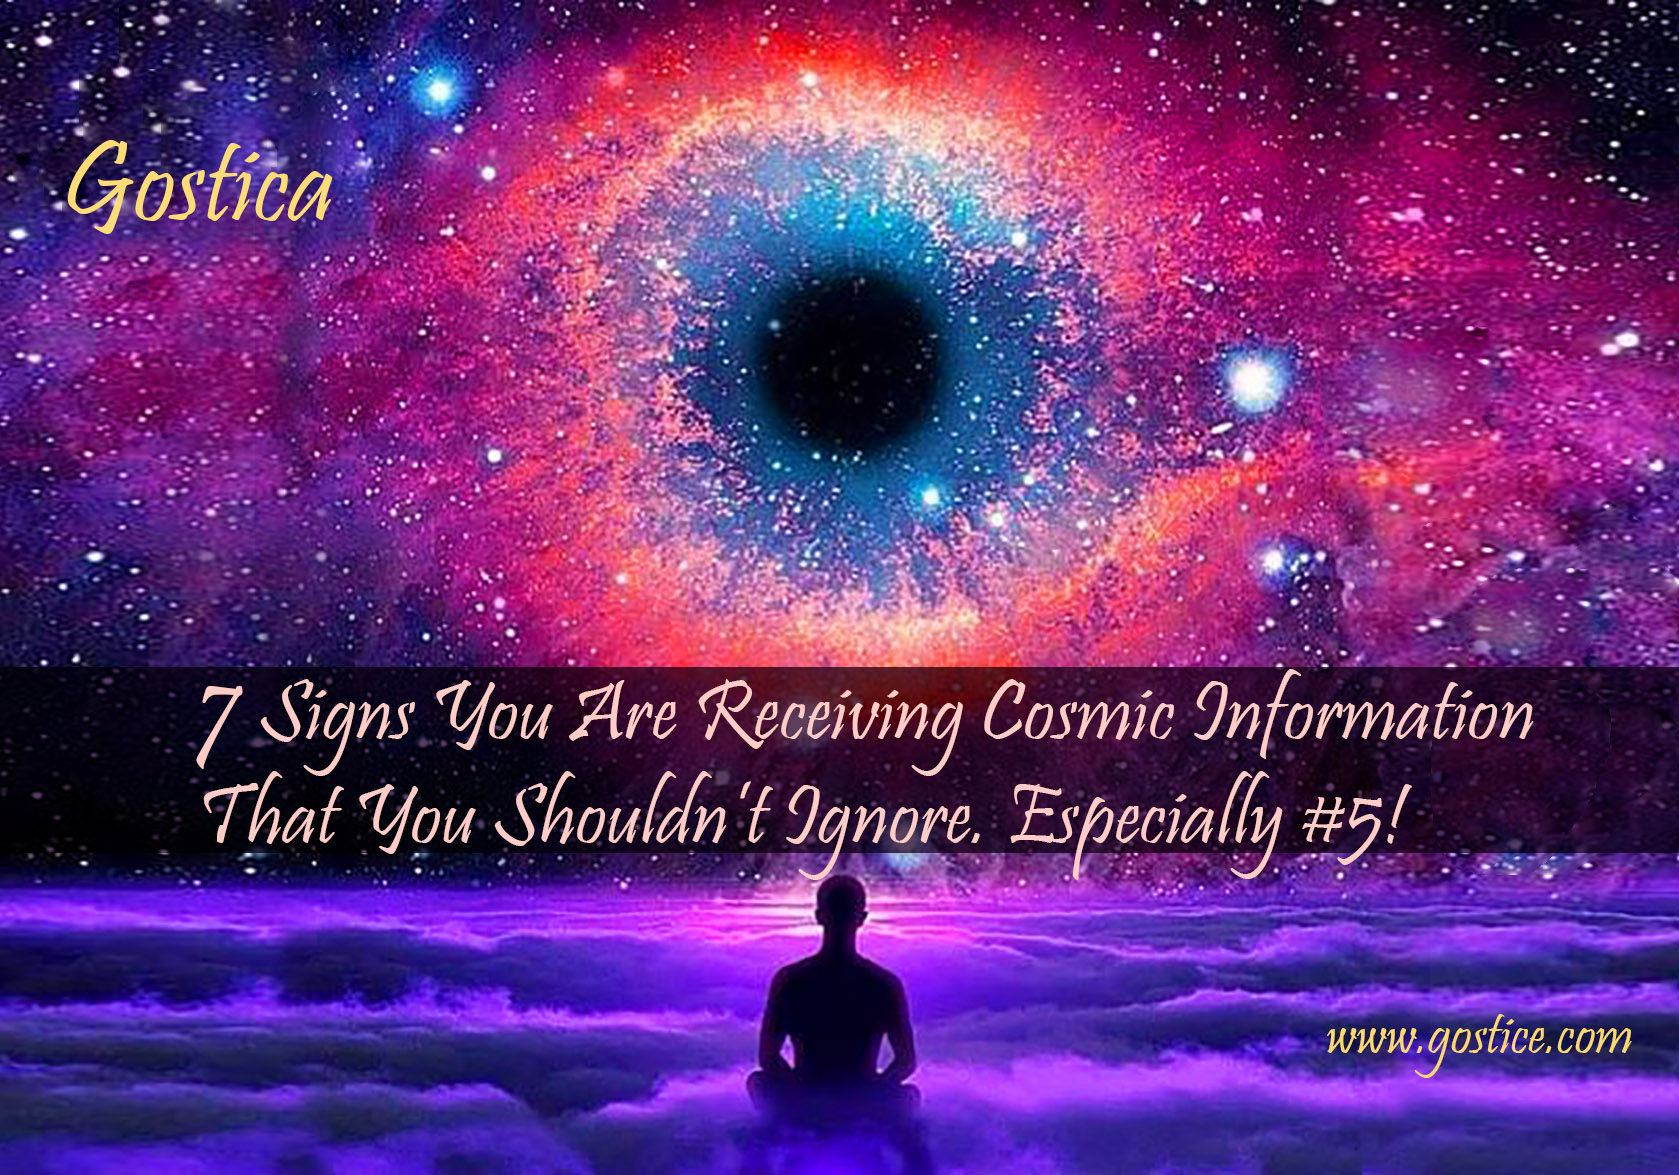 7-Signs-You-Are-Receiving-Cosmic-Information-That-You-Shouldn’t-Ignore.-Especially-5-1.jpg